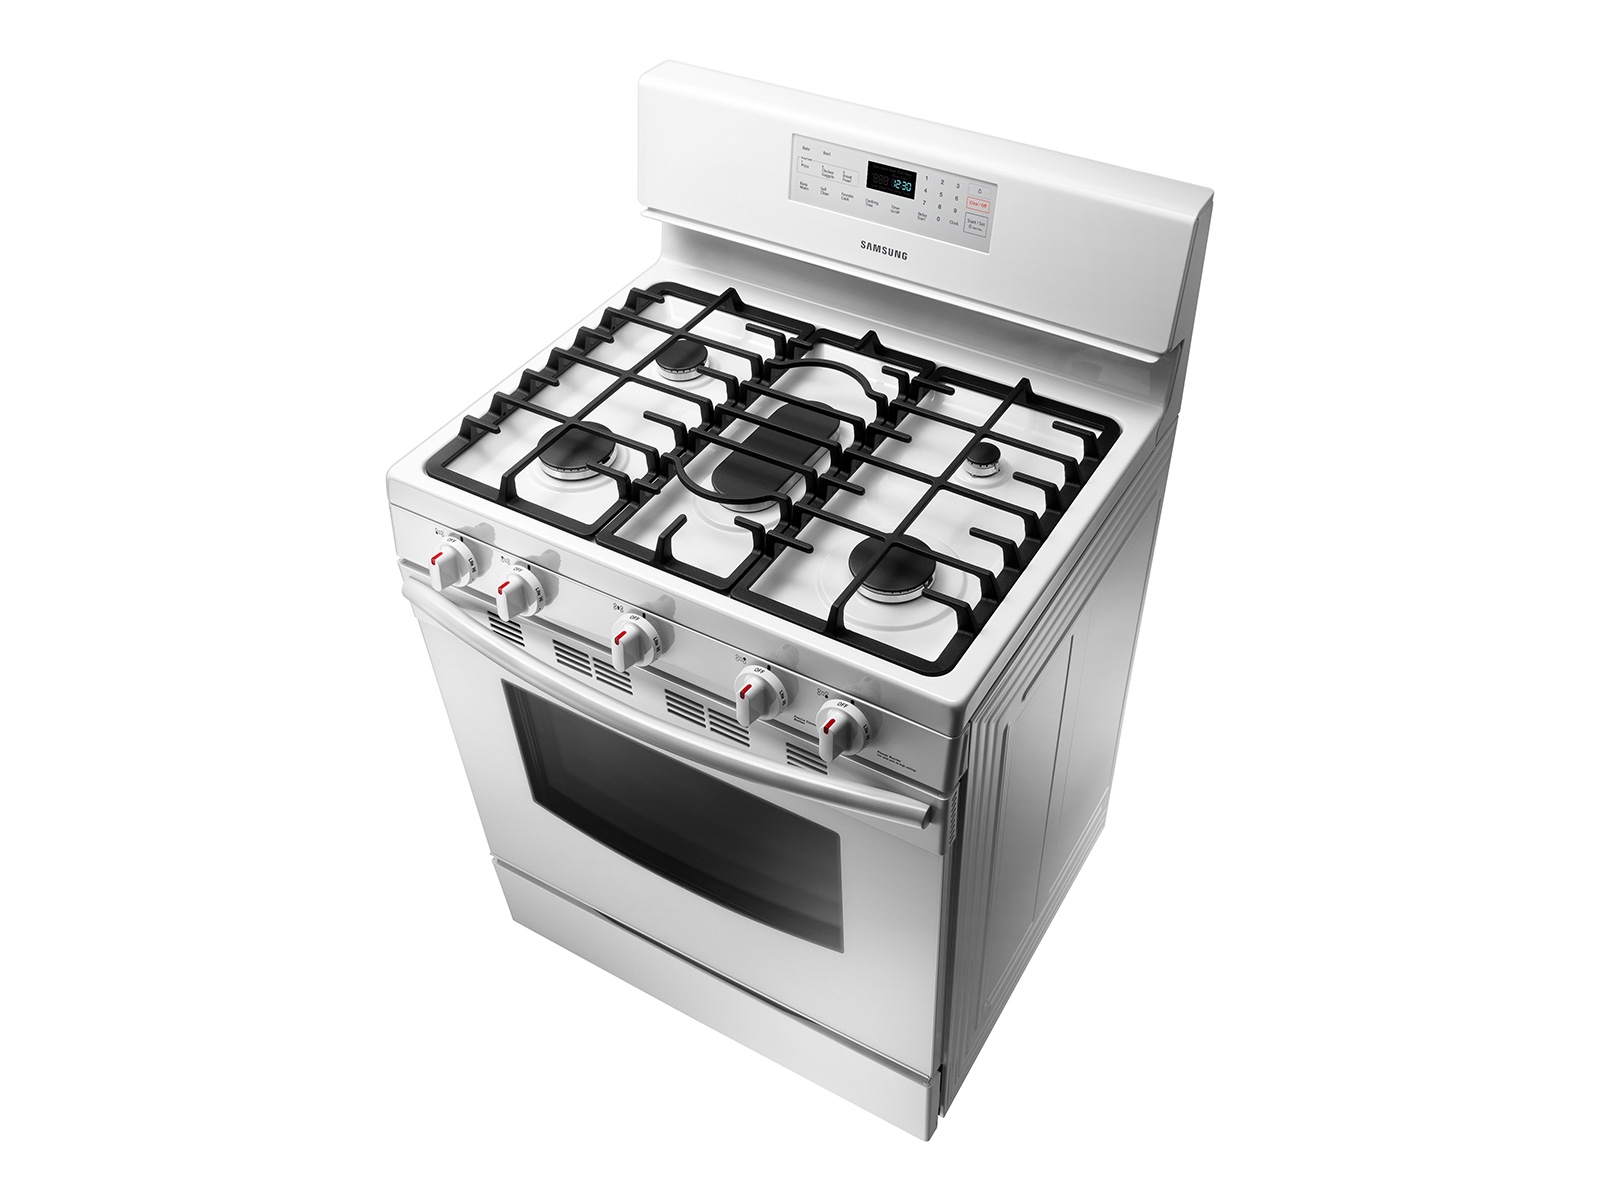 https://image-us.samsung.com/SamsungUS/home/home-appliances/ranges/all/pd/nx58f5500sw/gallery/08_Range_Gas_NX58F5500SW_R-Perspective_Dynamic_Burners_Grates_White.jpg?$product-details-jpg$